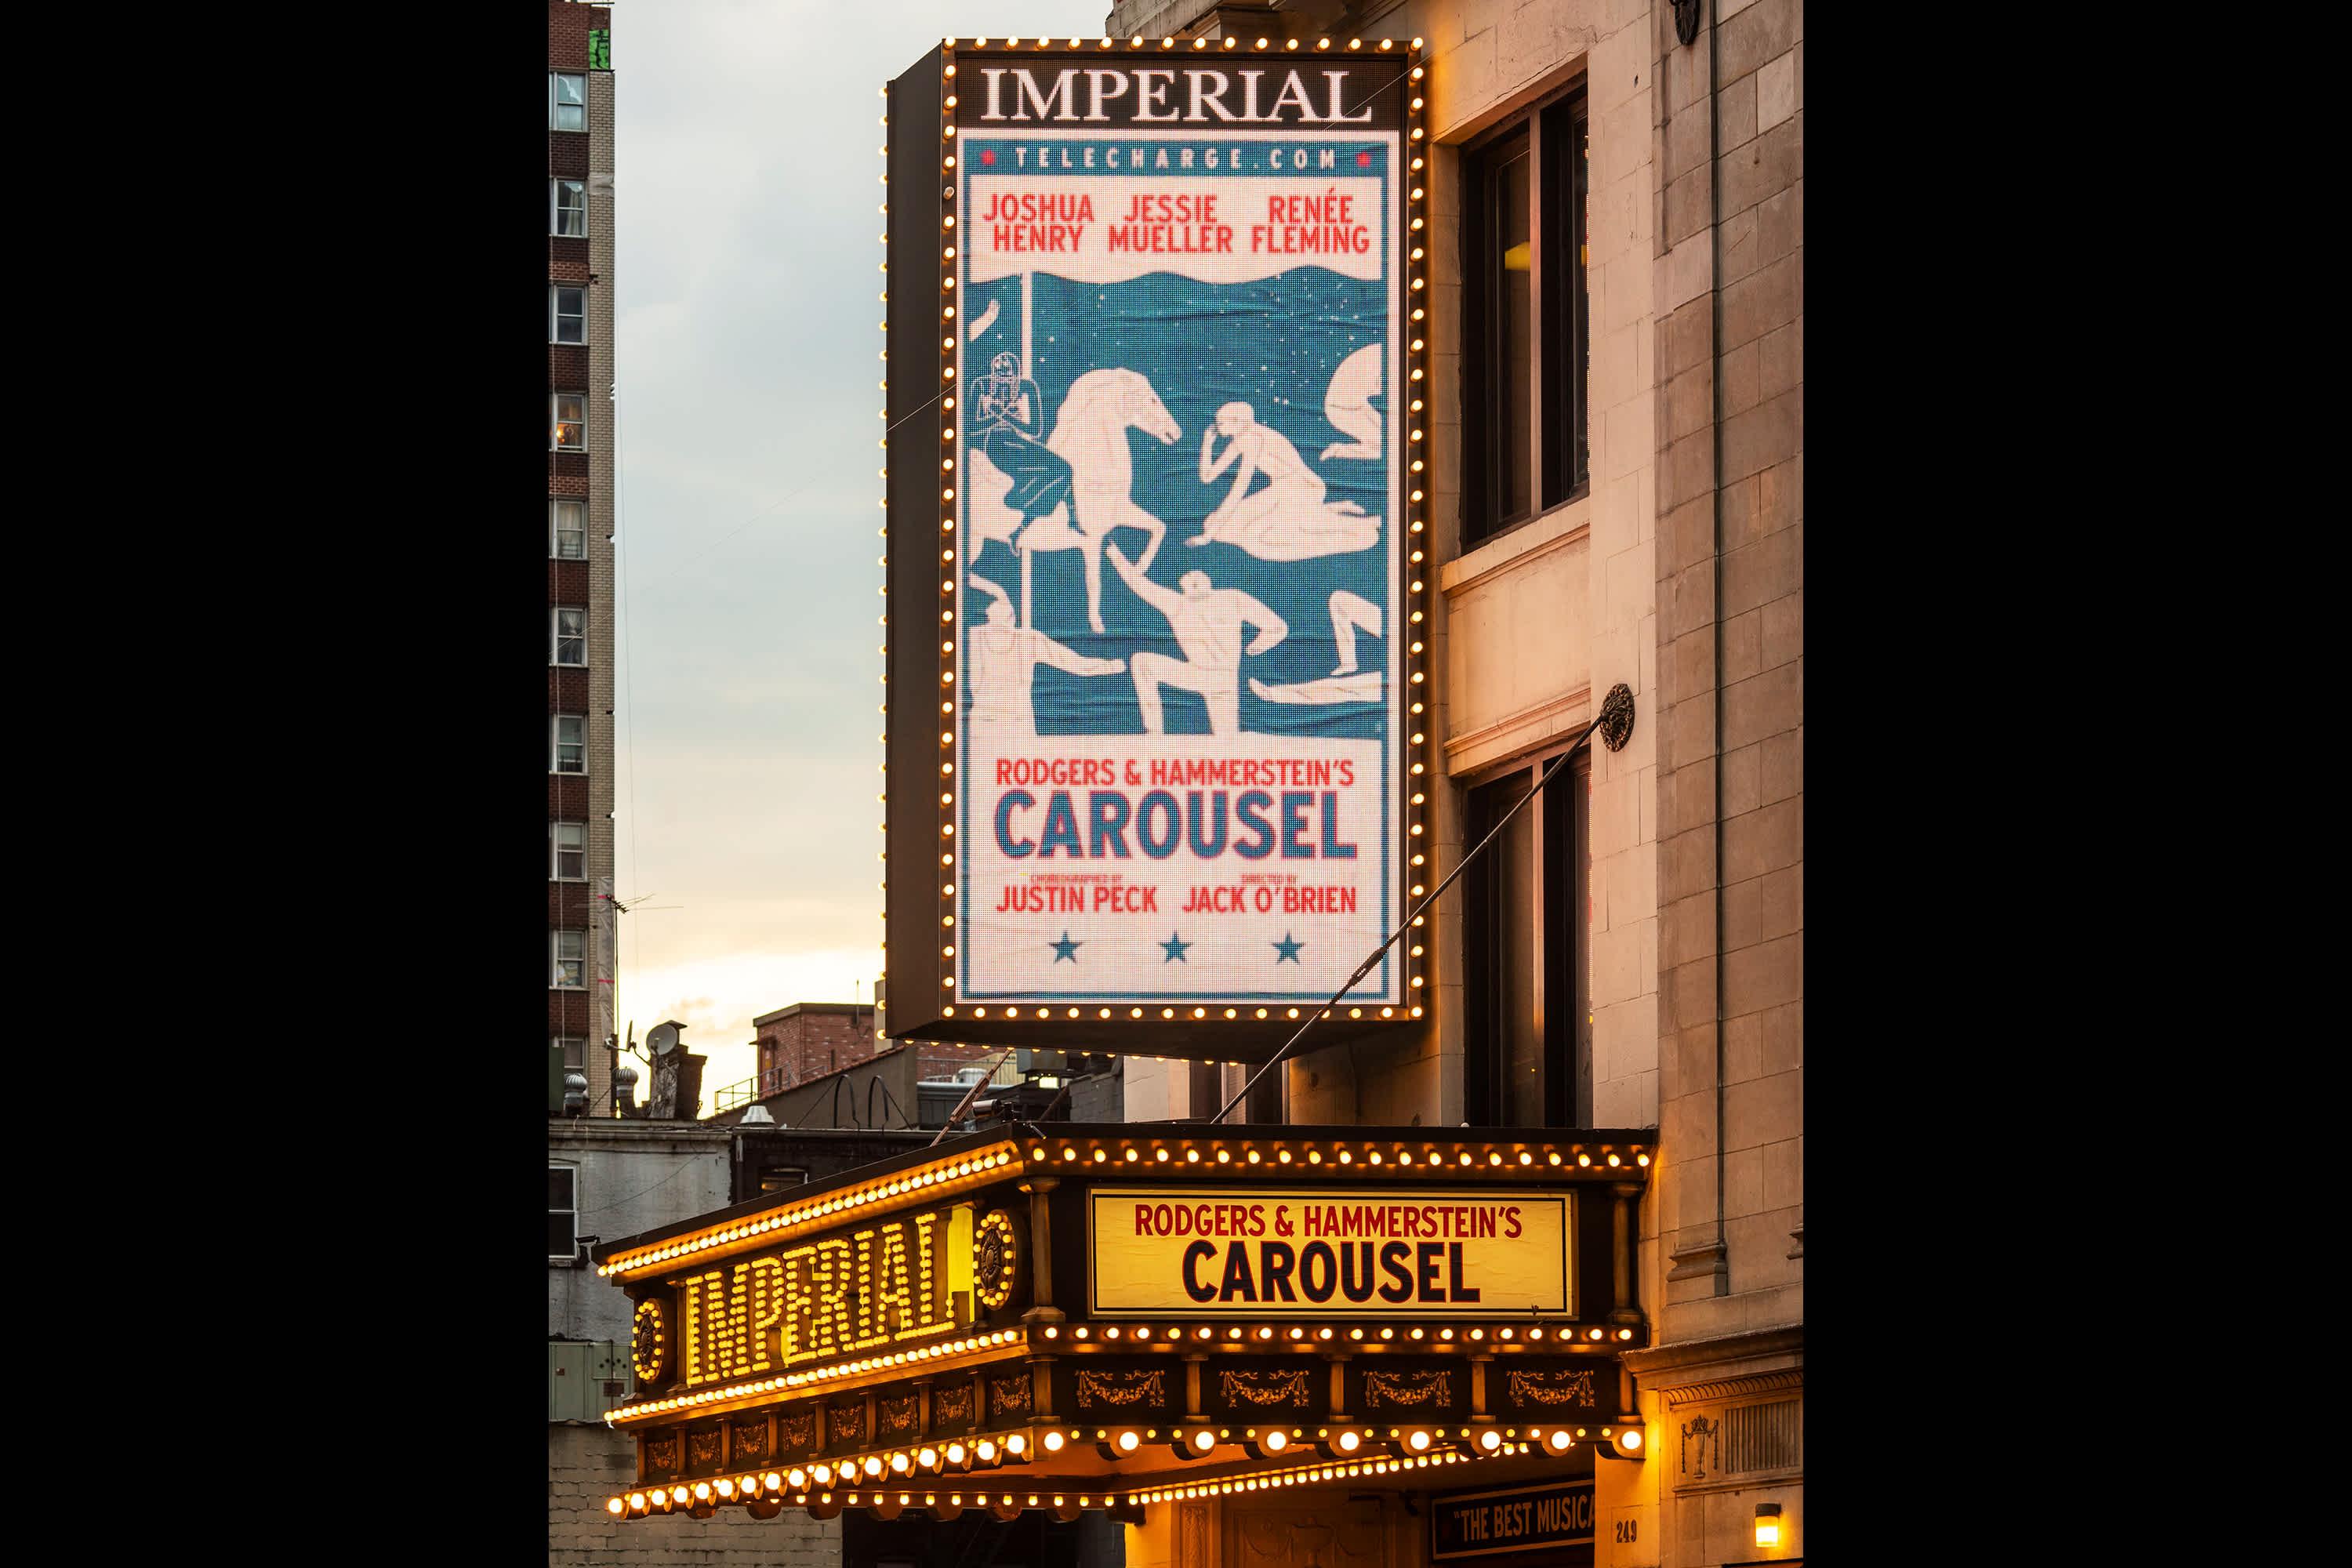 Carousel-Broadway-Times-Square-Manhattan-NYC-Marquee-Theatre-Broadway-Week-David-La-Spina